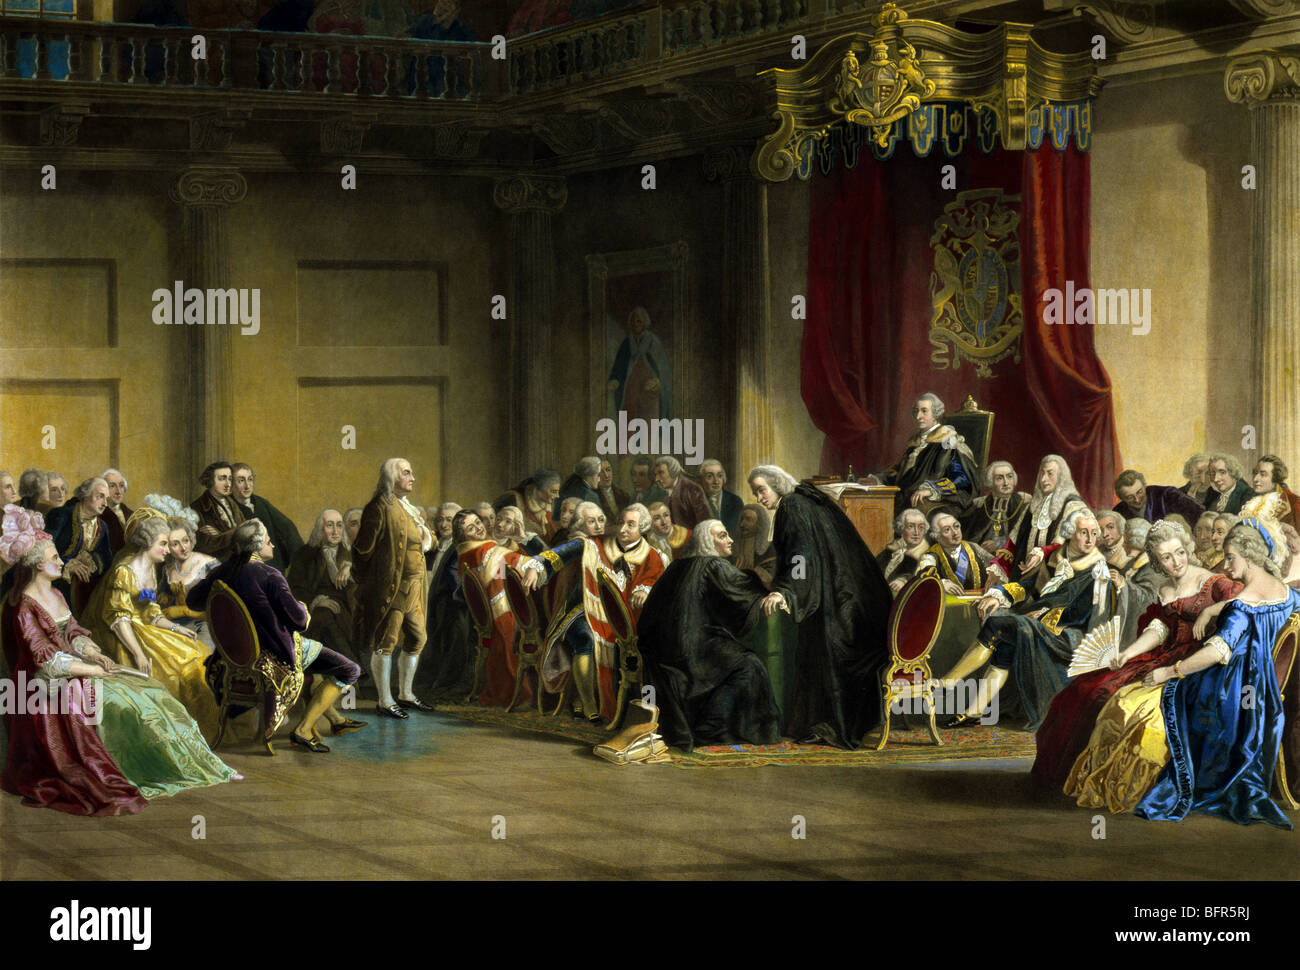 Print c1859 of Benjamin Franklin appearing before the Lords in Council (Privy Council) at Whitehall Chapel in London in 1774. Stock Photo